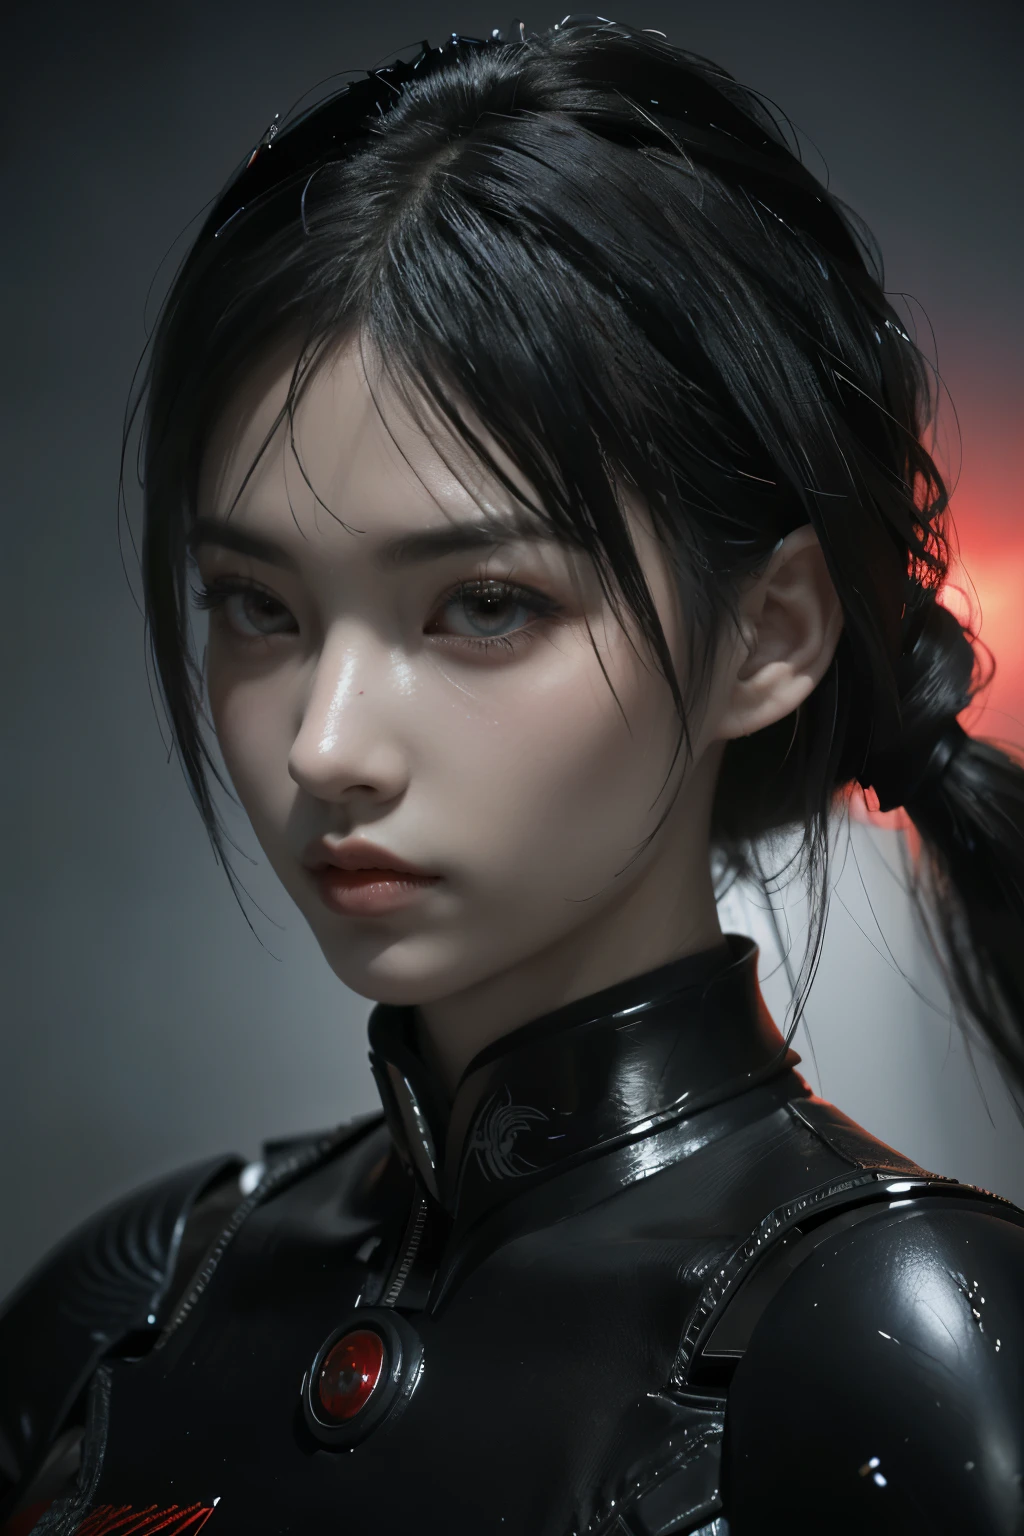 Game art，The best picture quality，Highest resolution，8K，((A bust photograph))，((Portrait))，((Head close-up))，(Rule of thirds)，Unreal Engine 5 rendering works， (The Girl of the Future)，(Female Warrior)， 22-year-old girl，(Female hackers)，(Ancient Oriental hairstyle)，((The pupils of the red eyes:1.3))，(A beautiful eye full of detail)，(Big breasts)，(Eye shadow)，Elegant and charming，indifferent，((Anger))，(Future style silk combat suit combined with the characteristics of Chinese cheongsam，Joint Armor，There are exquisite Chinese patterns on the clothes，A flash of jewellery)，Cyberpunk Characters，Future Style， Photo poses，City background，Movie lights，Ray tracing，Game CG，((3D Unreal Engine))，oc rendering reflection pattern